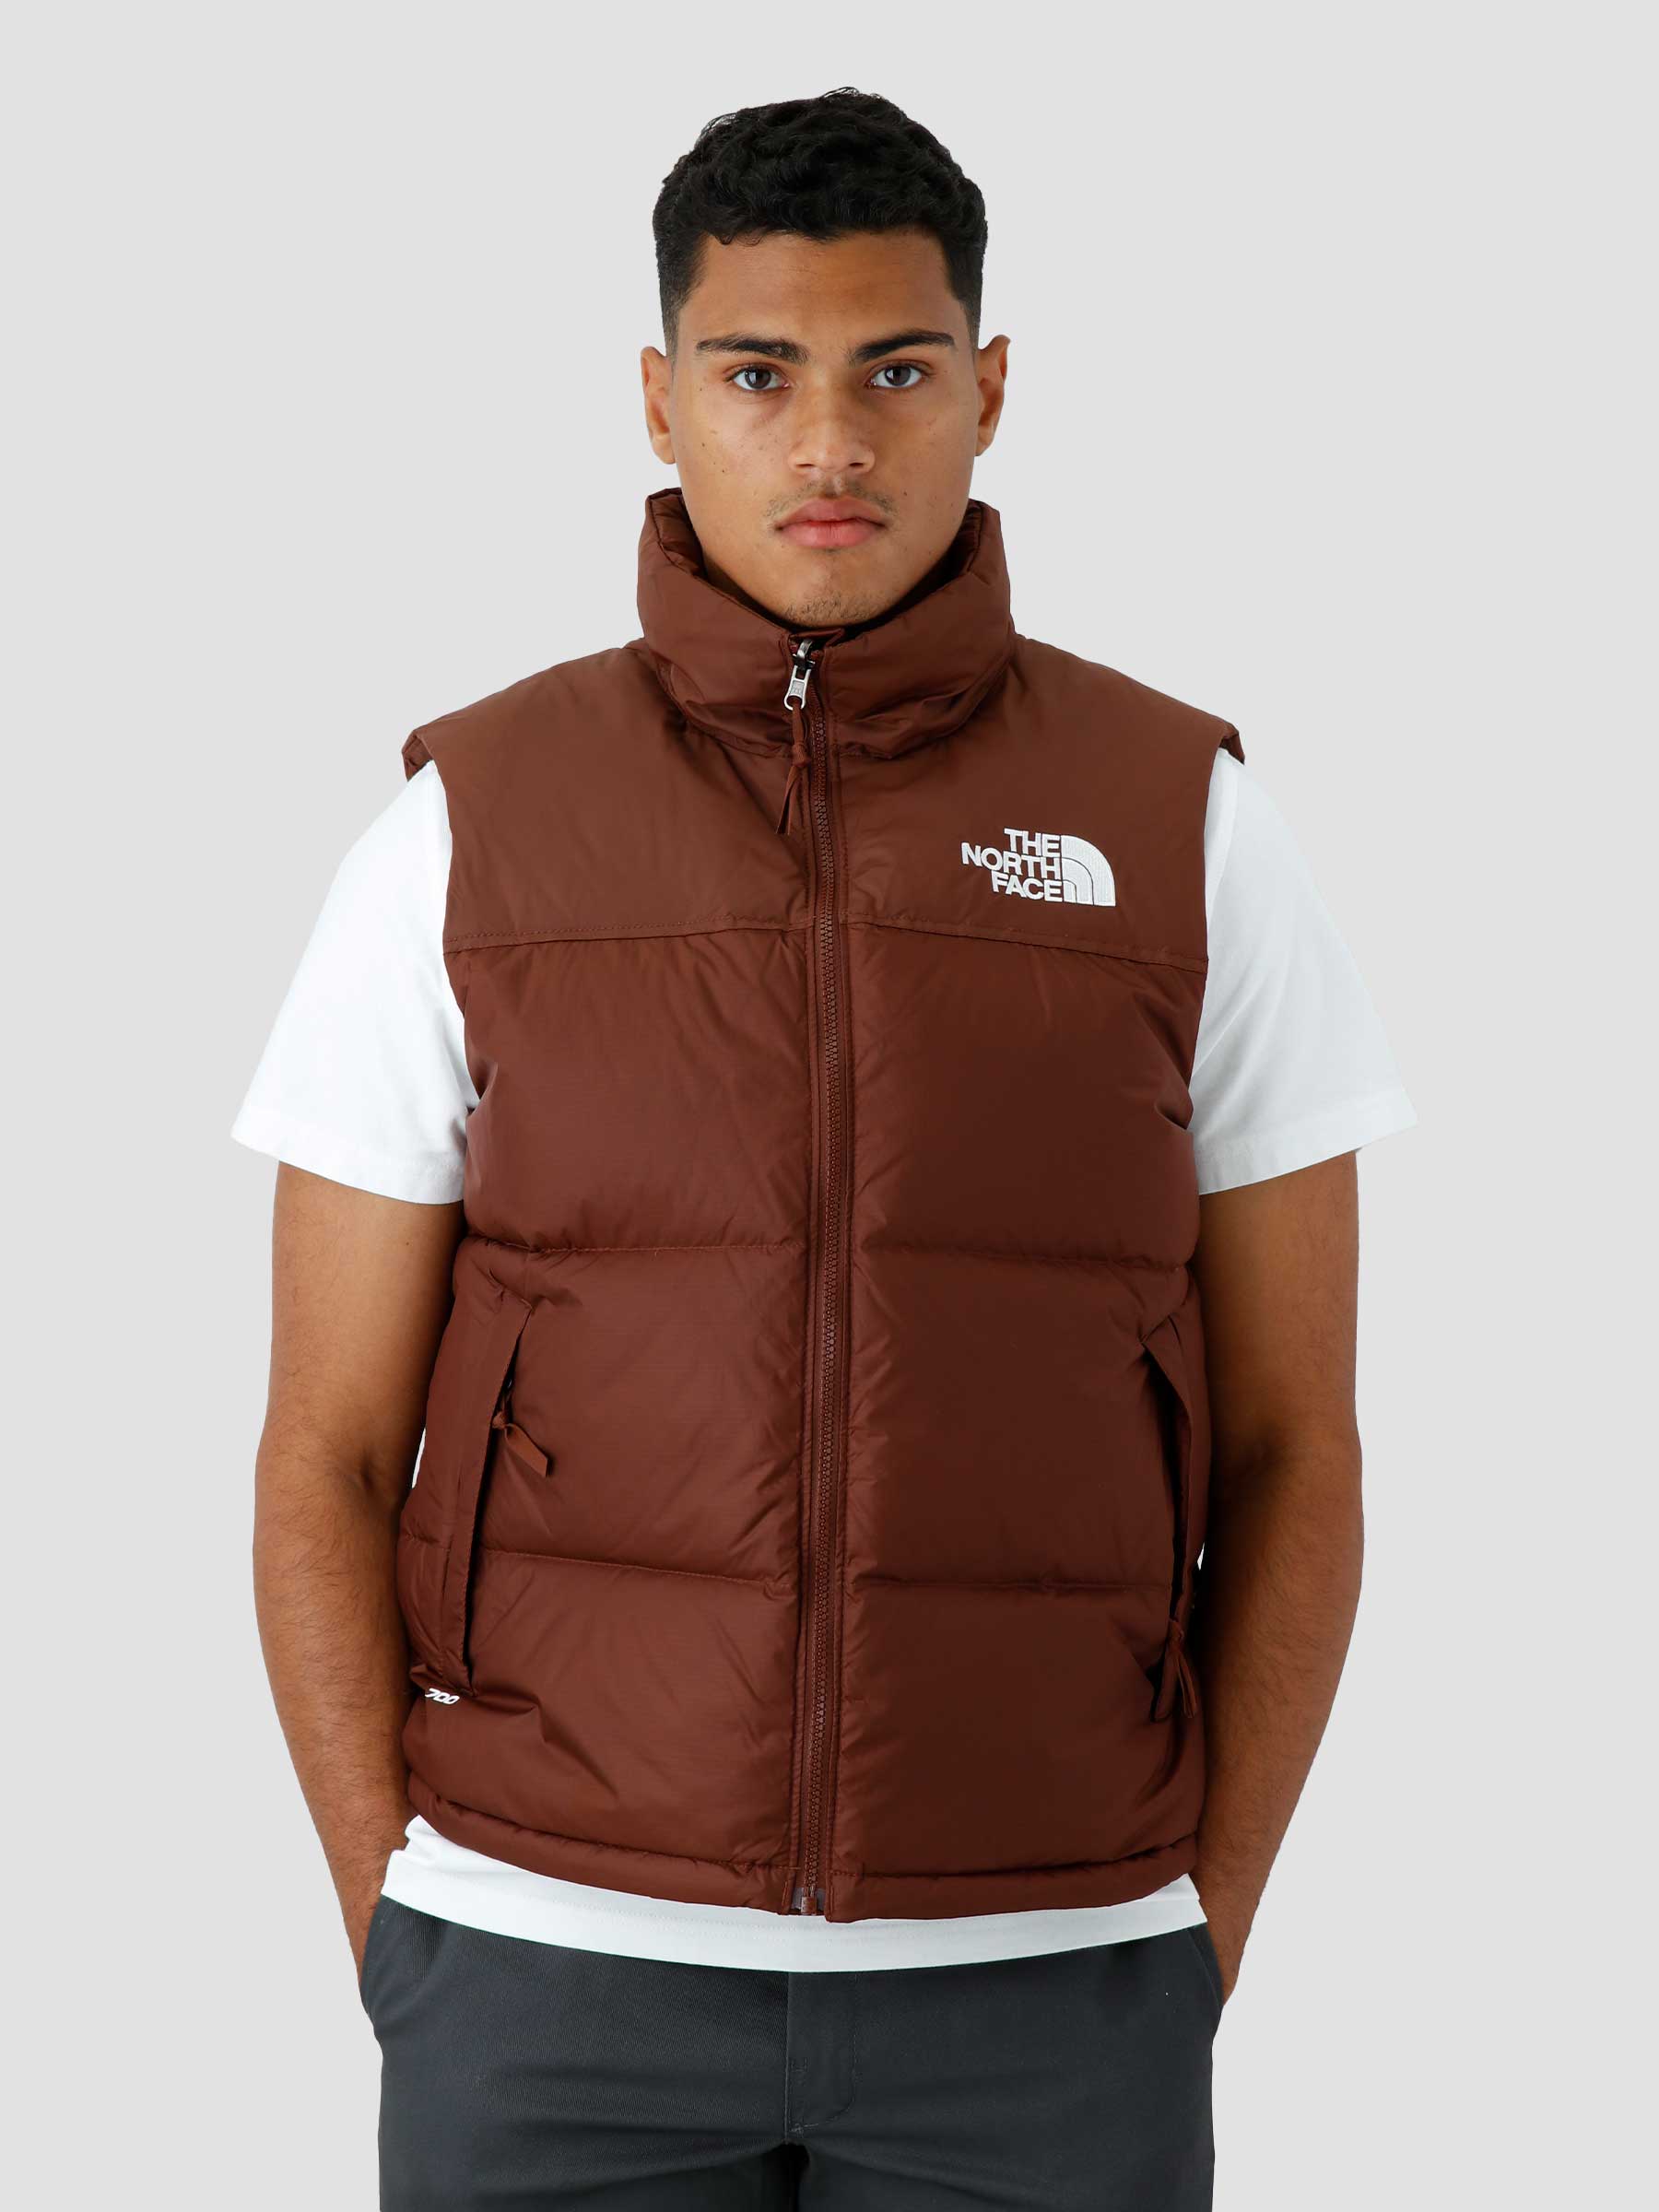 outfit picks week 38 The North Face M 1996 Retro Nuptse Vest